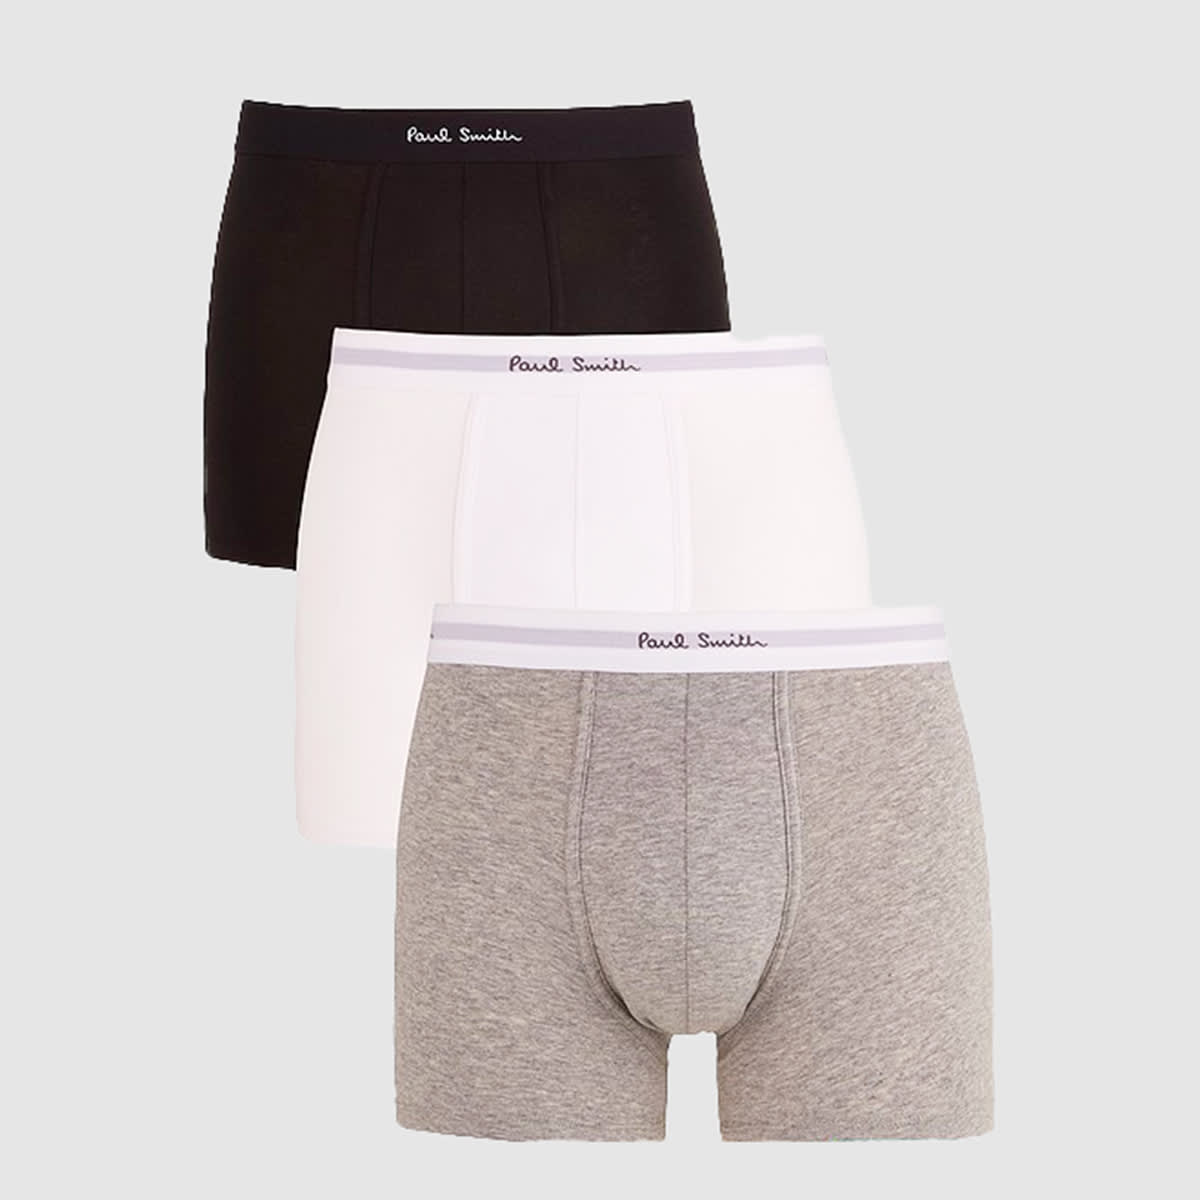 Paul Smith Black, White And Grey Cotton Blend Boxer 3-pack Set In Red